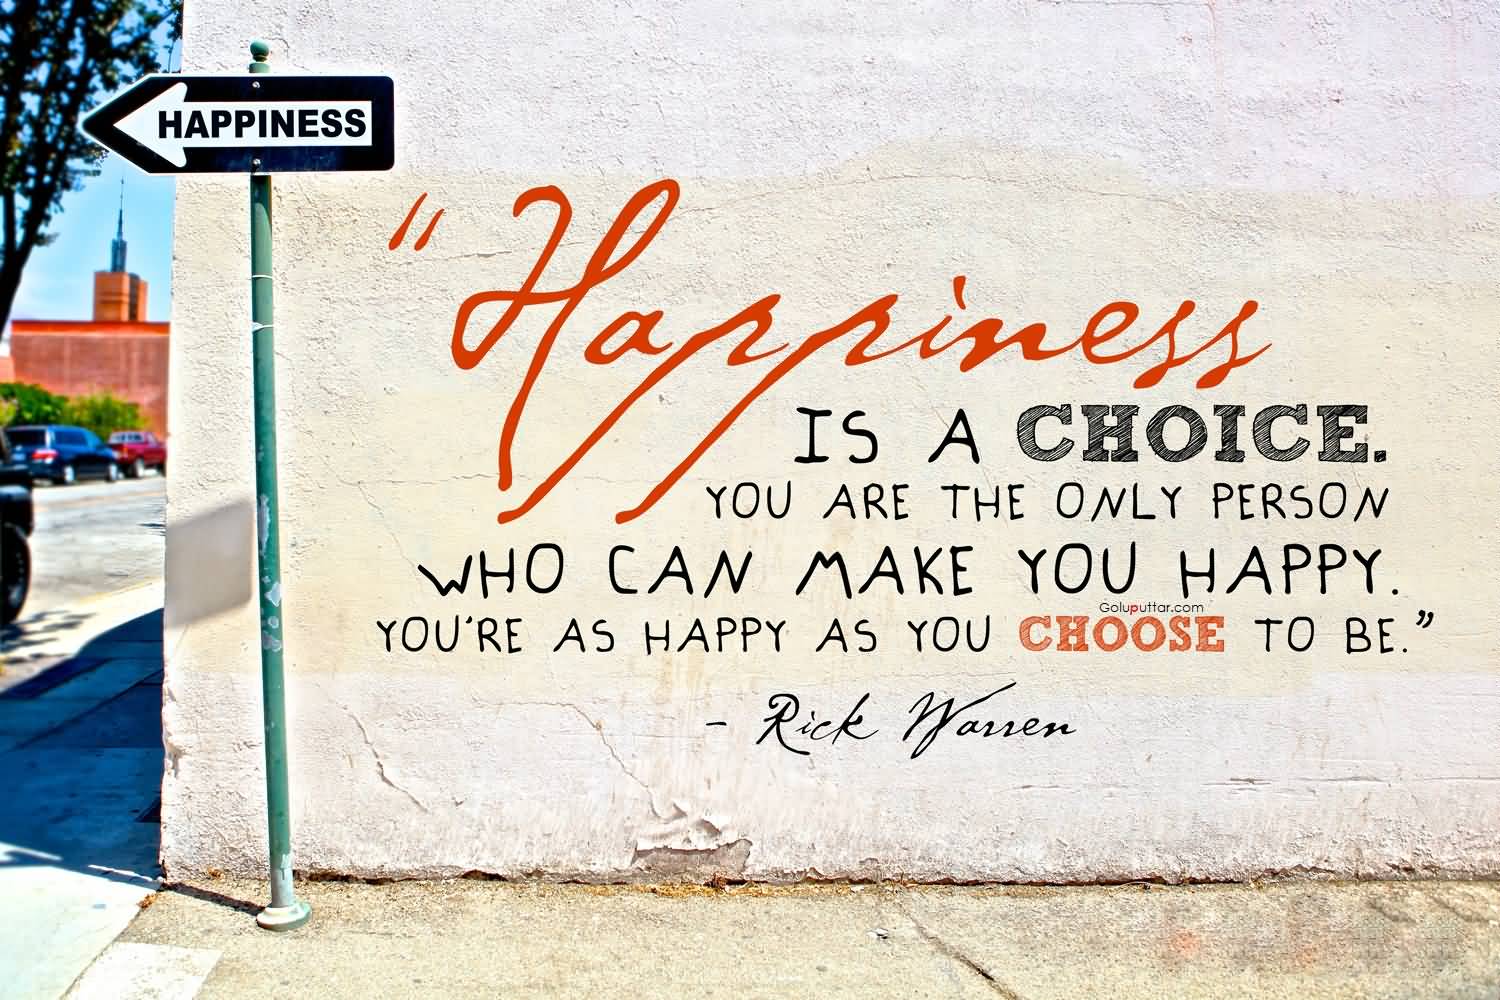 Happiness is a choice. You are the only person who can make you happy. You're as happy as you choose to be. Rick Warren